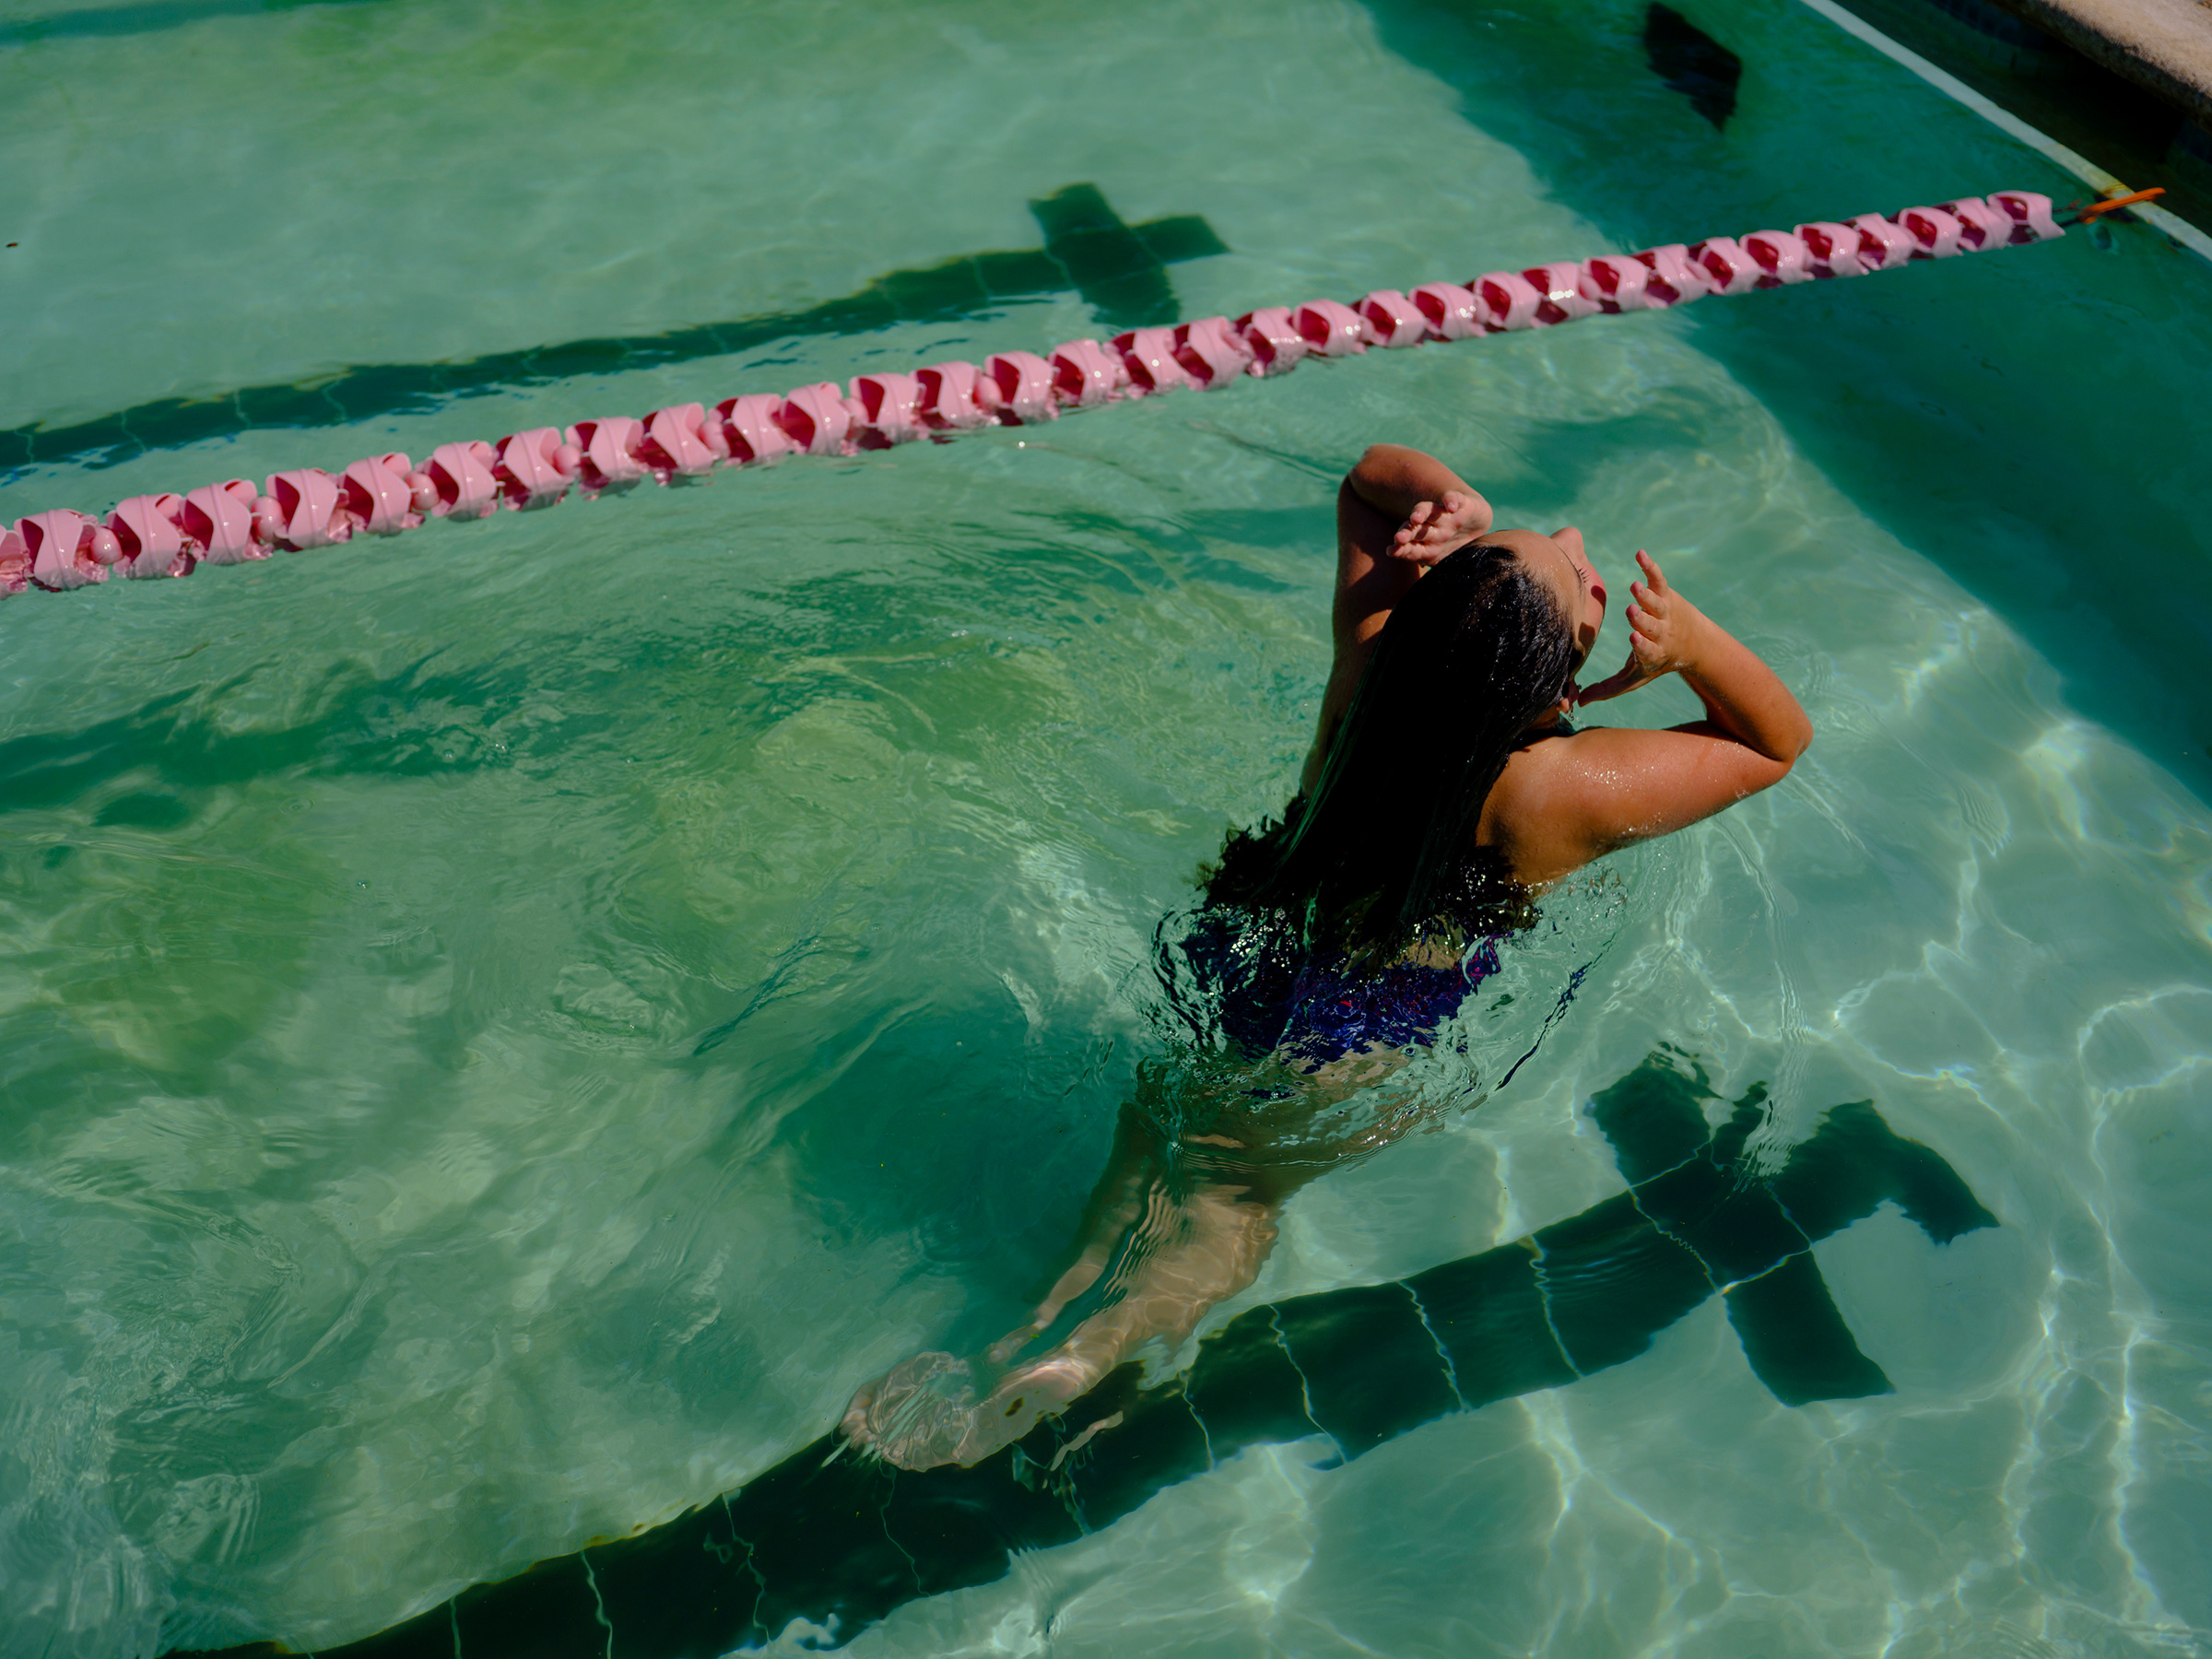 Maya, 11, swims in Houston. State law prohibits Maya from playing girls’ sports in school, but she swims on a private team. It’s not the first time being trans has prevented her from competing—she quit gymnastics years ago because she didn’t want to risk disqualifying her teammates. The experience made her “mad and sad,” she says. But she finds swimming on her new team “really fun and relaxing.”